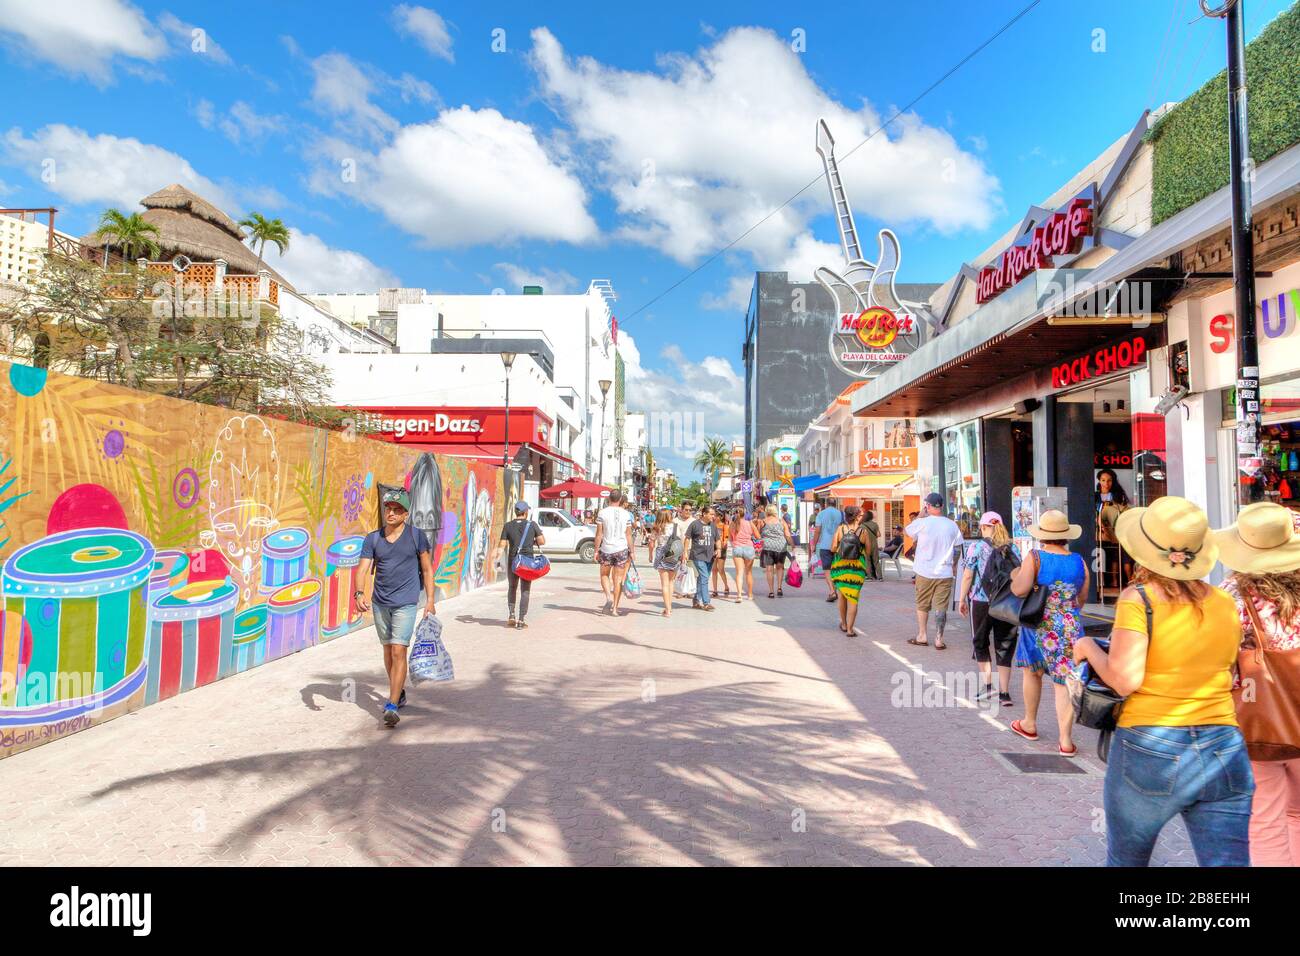 PLAYA DEL CARMEN, MEXICO - Dec. 26, 2019: Visitors enjoy shopping on famous 5th Avenue in the entertainment district of Playa del Carmen in the Yucata Stock Photo